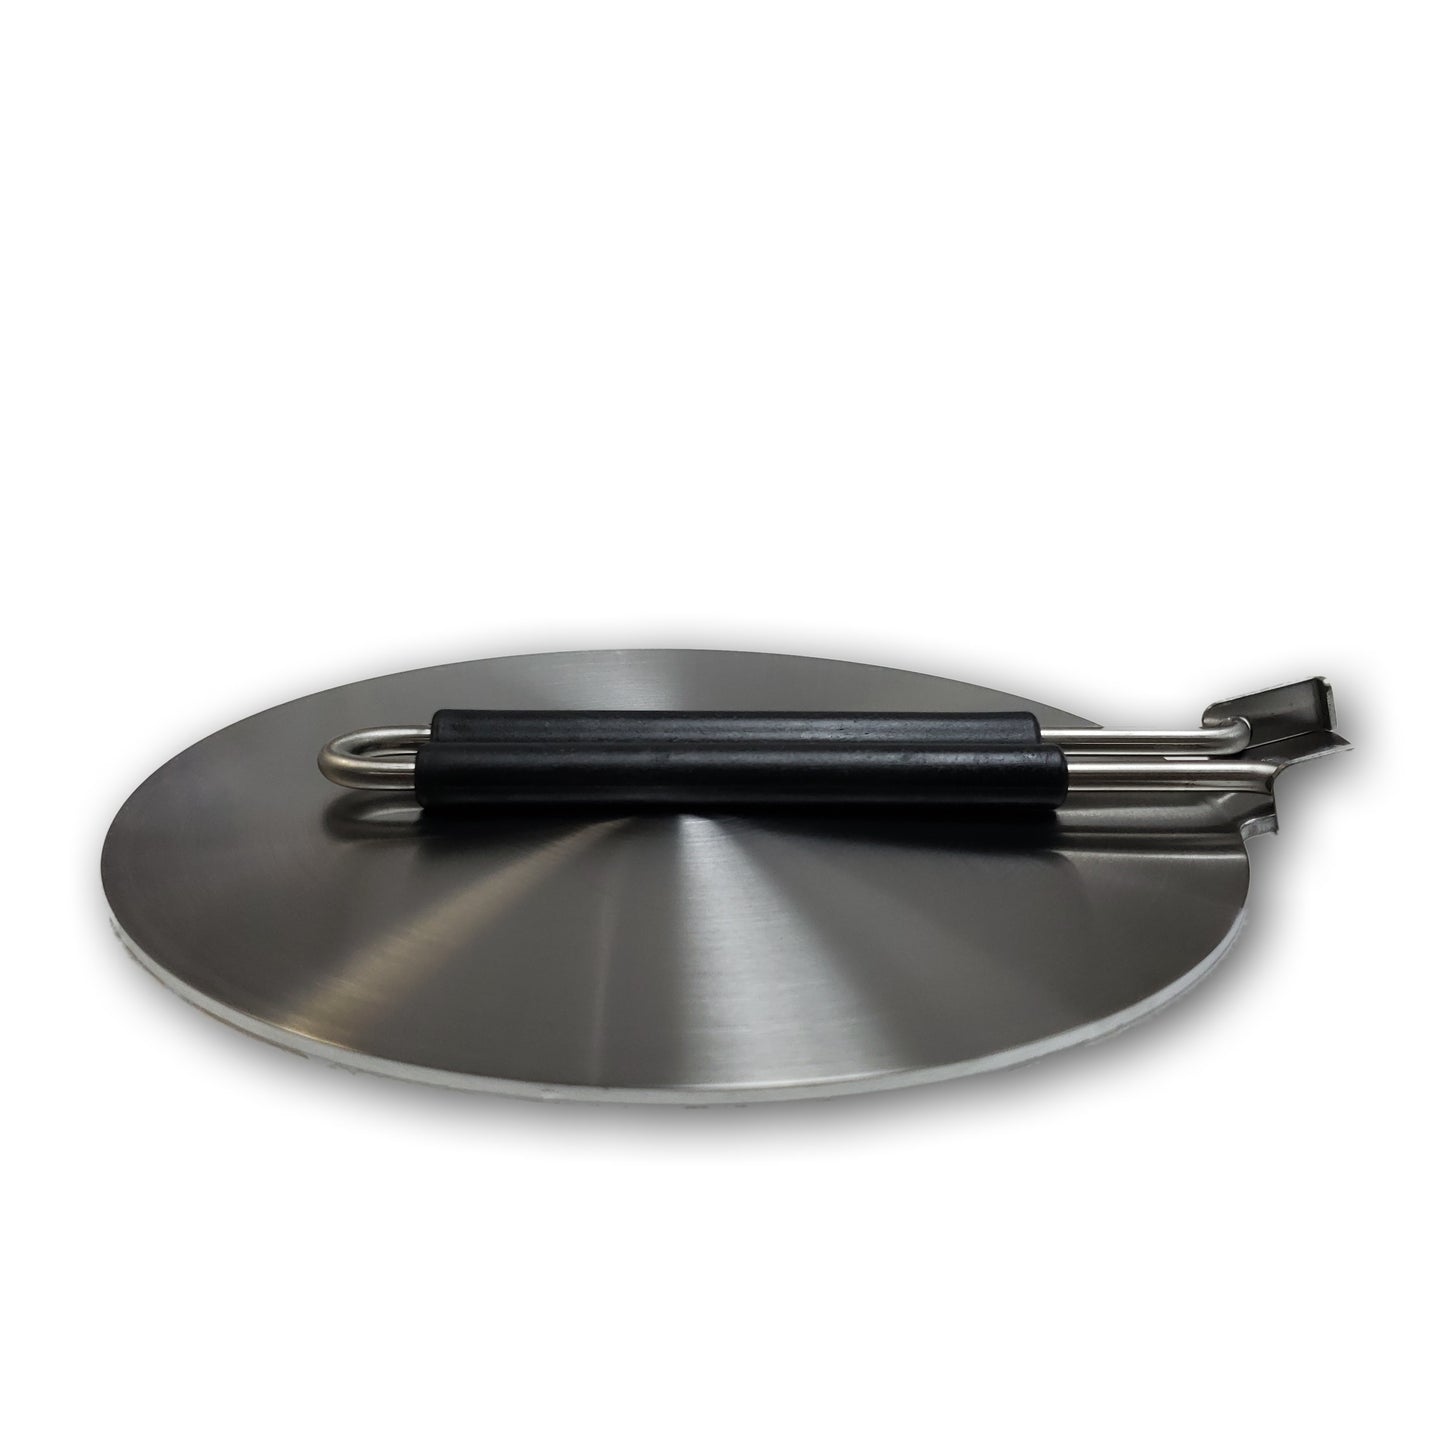 Foldable Induction Hob Heat Diffuser Stainless Steel, Gas Stovetop Heat Diffuser Ring Plate CookTop 8" , 9.5" or 11" or Set Discount - UproMax